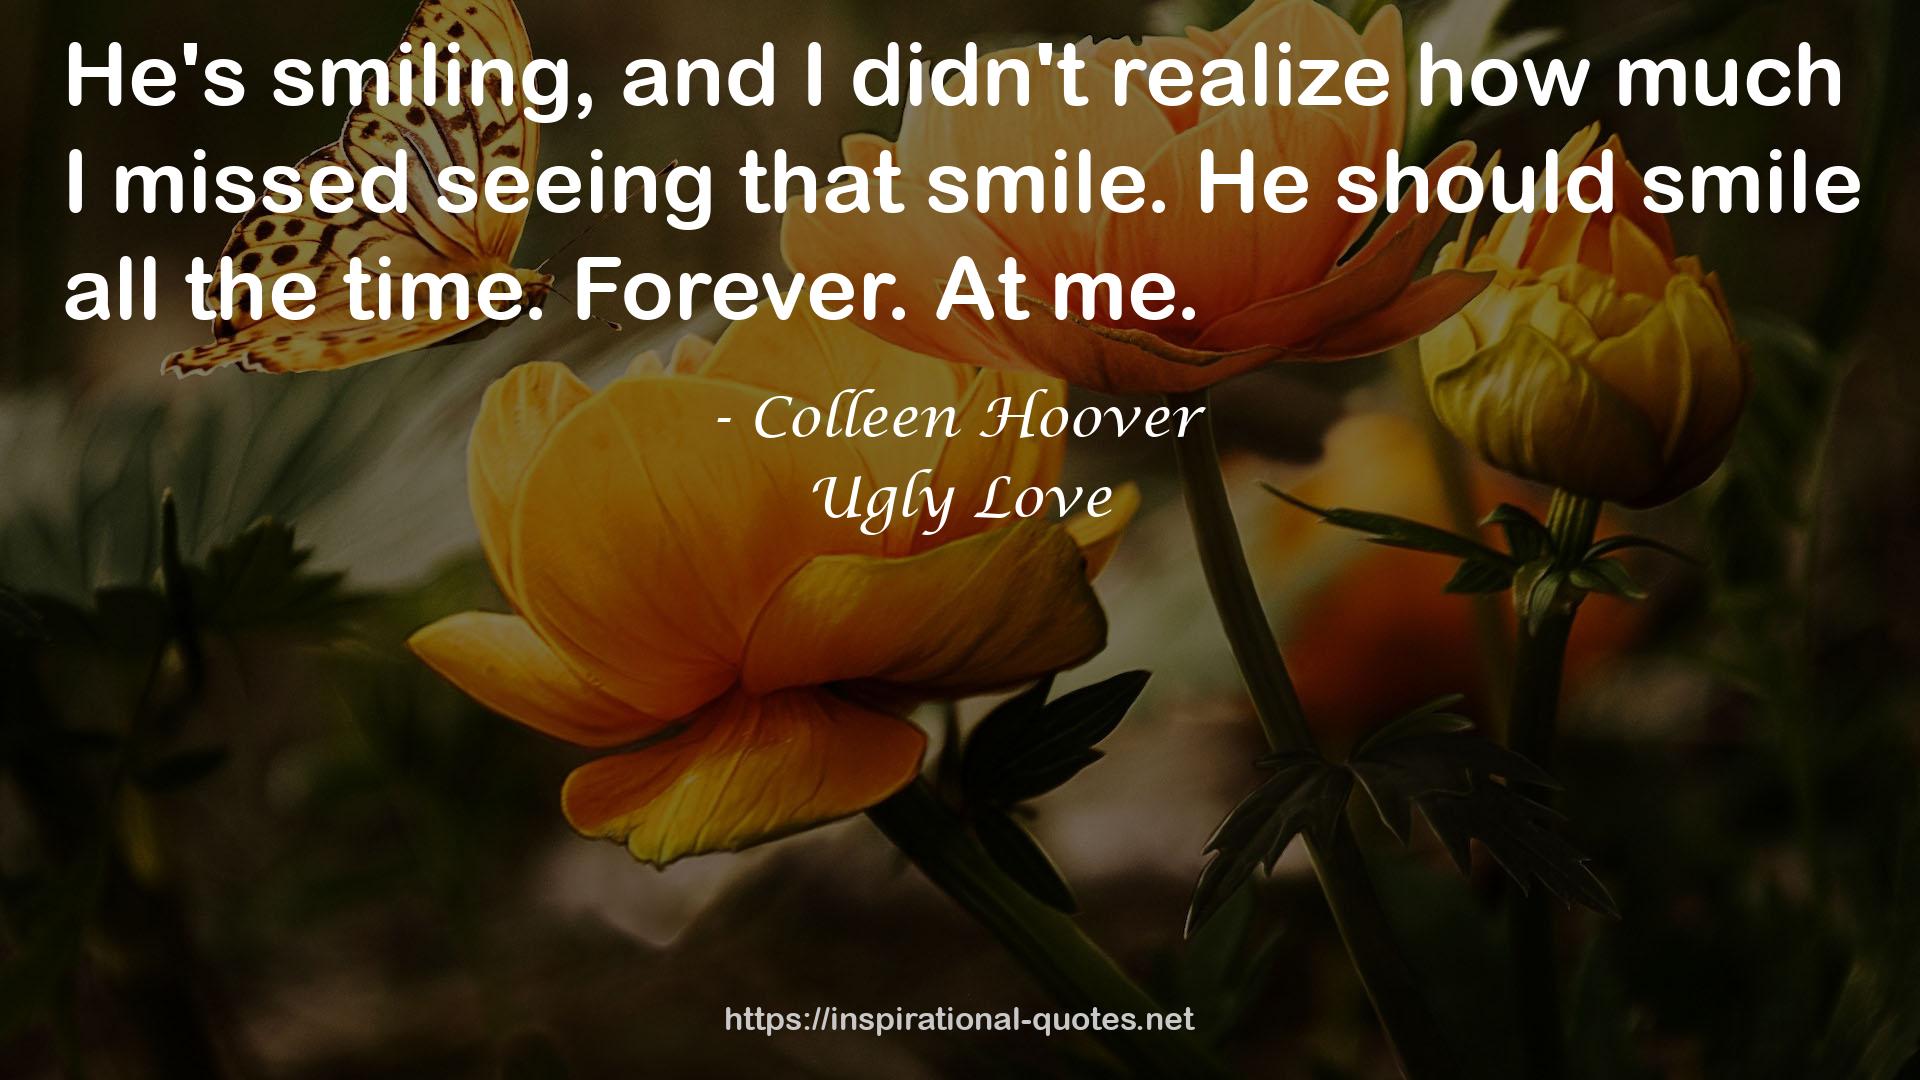 Ugly Love QUOTES